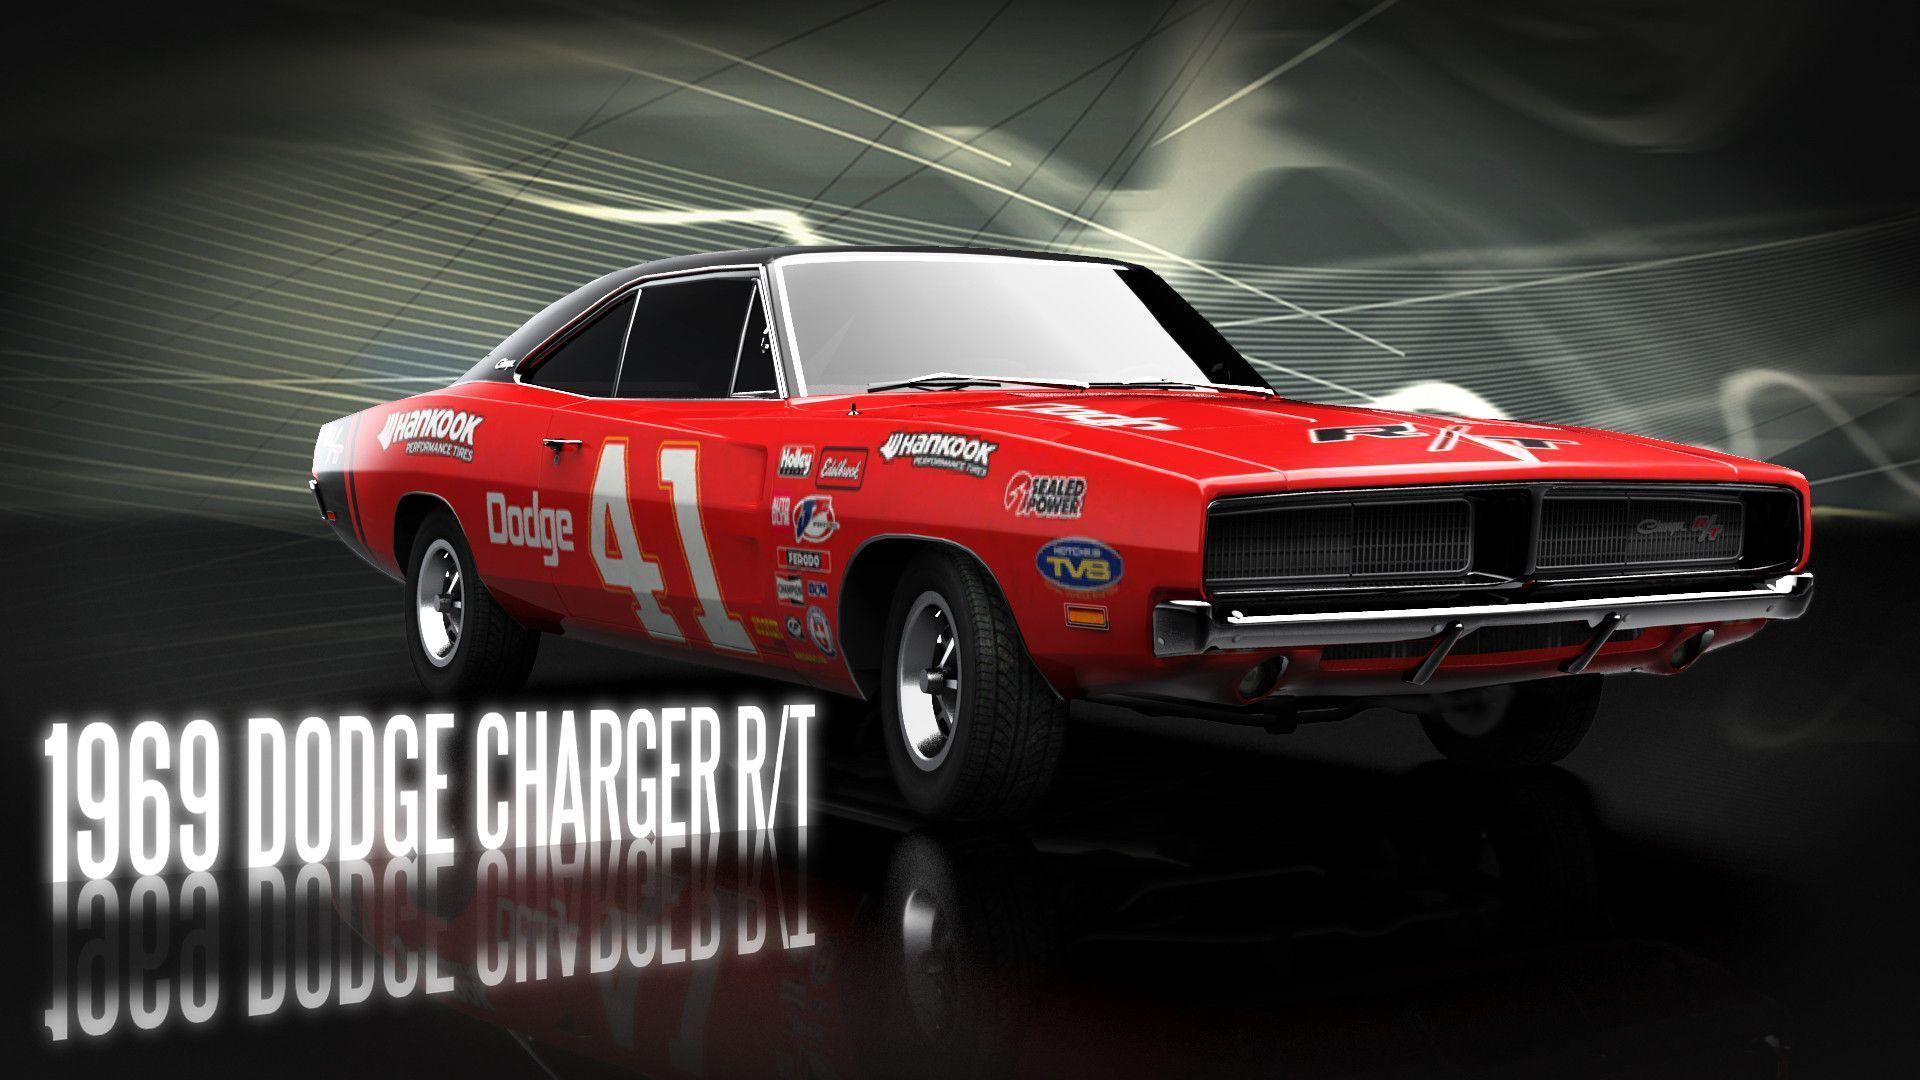 1969 Dodge Charger Wallpapers - Wallpaper Cave.